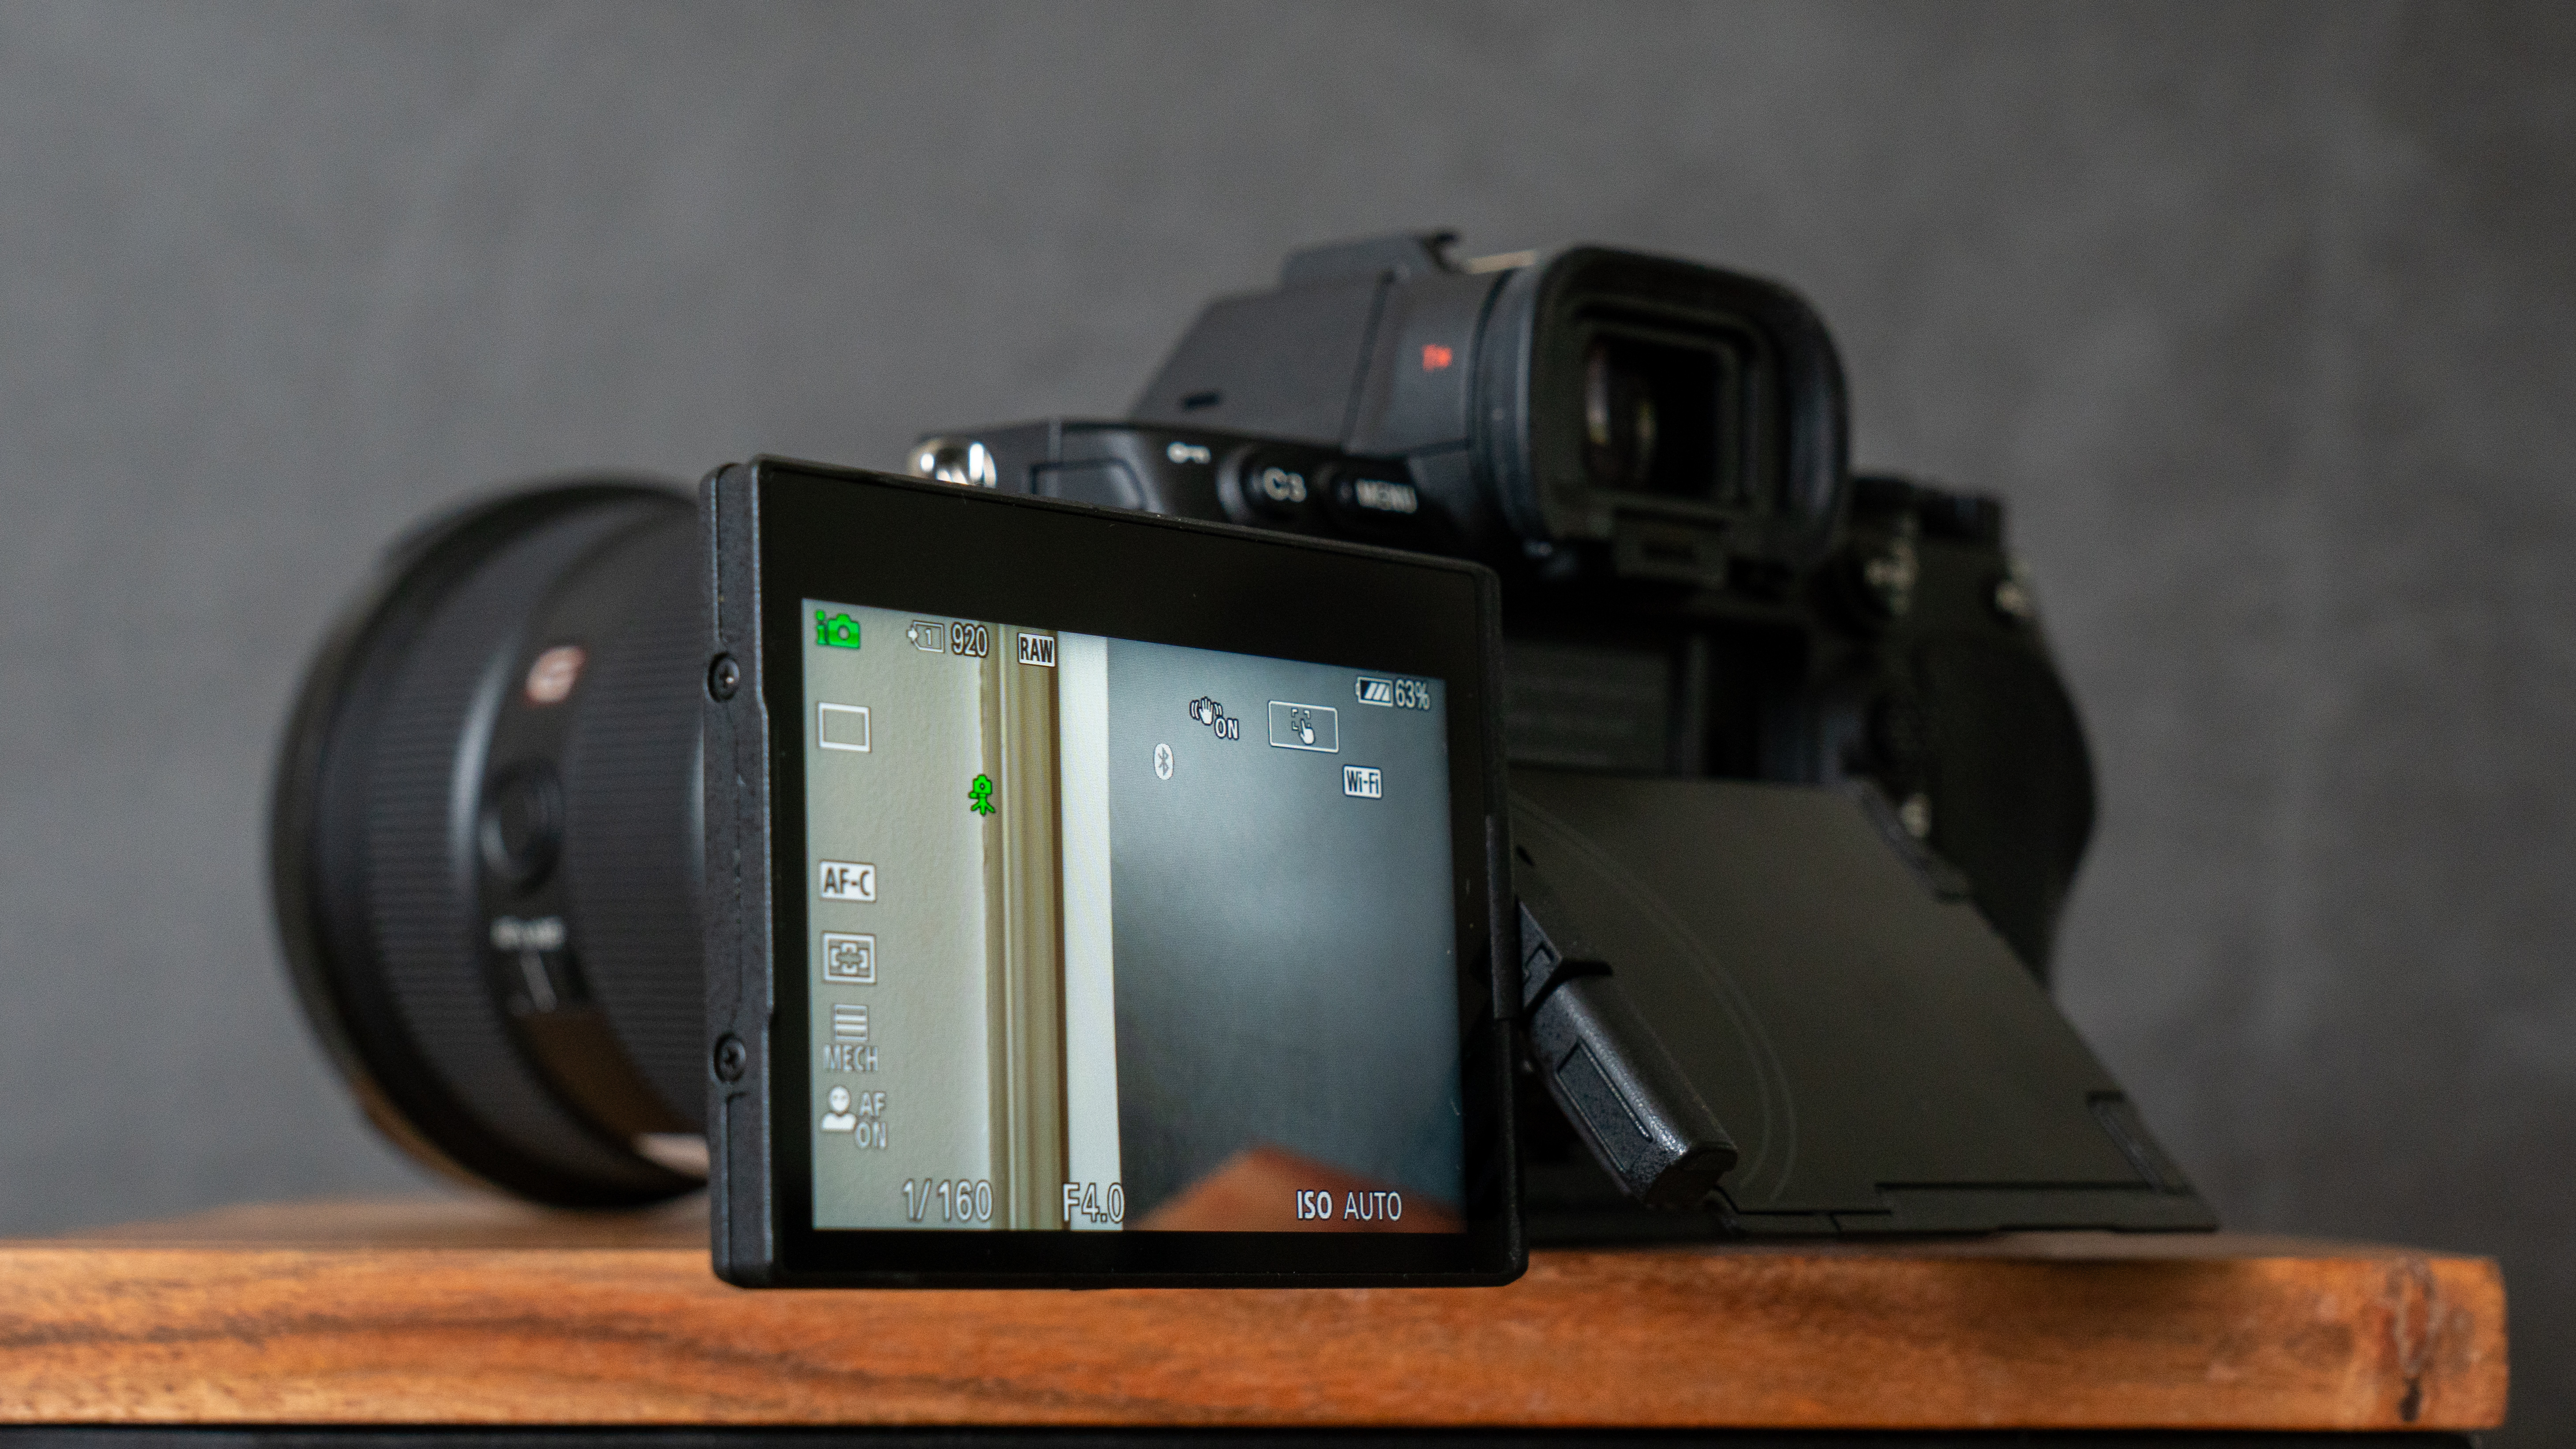 The fully articulating screen on the Sony A7R V is pulled out showing it in use